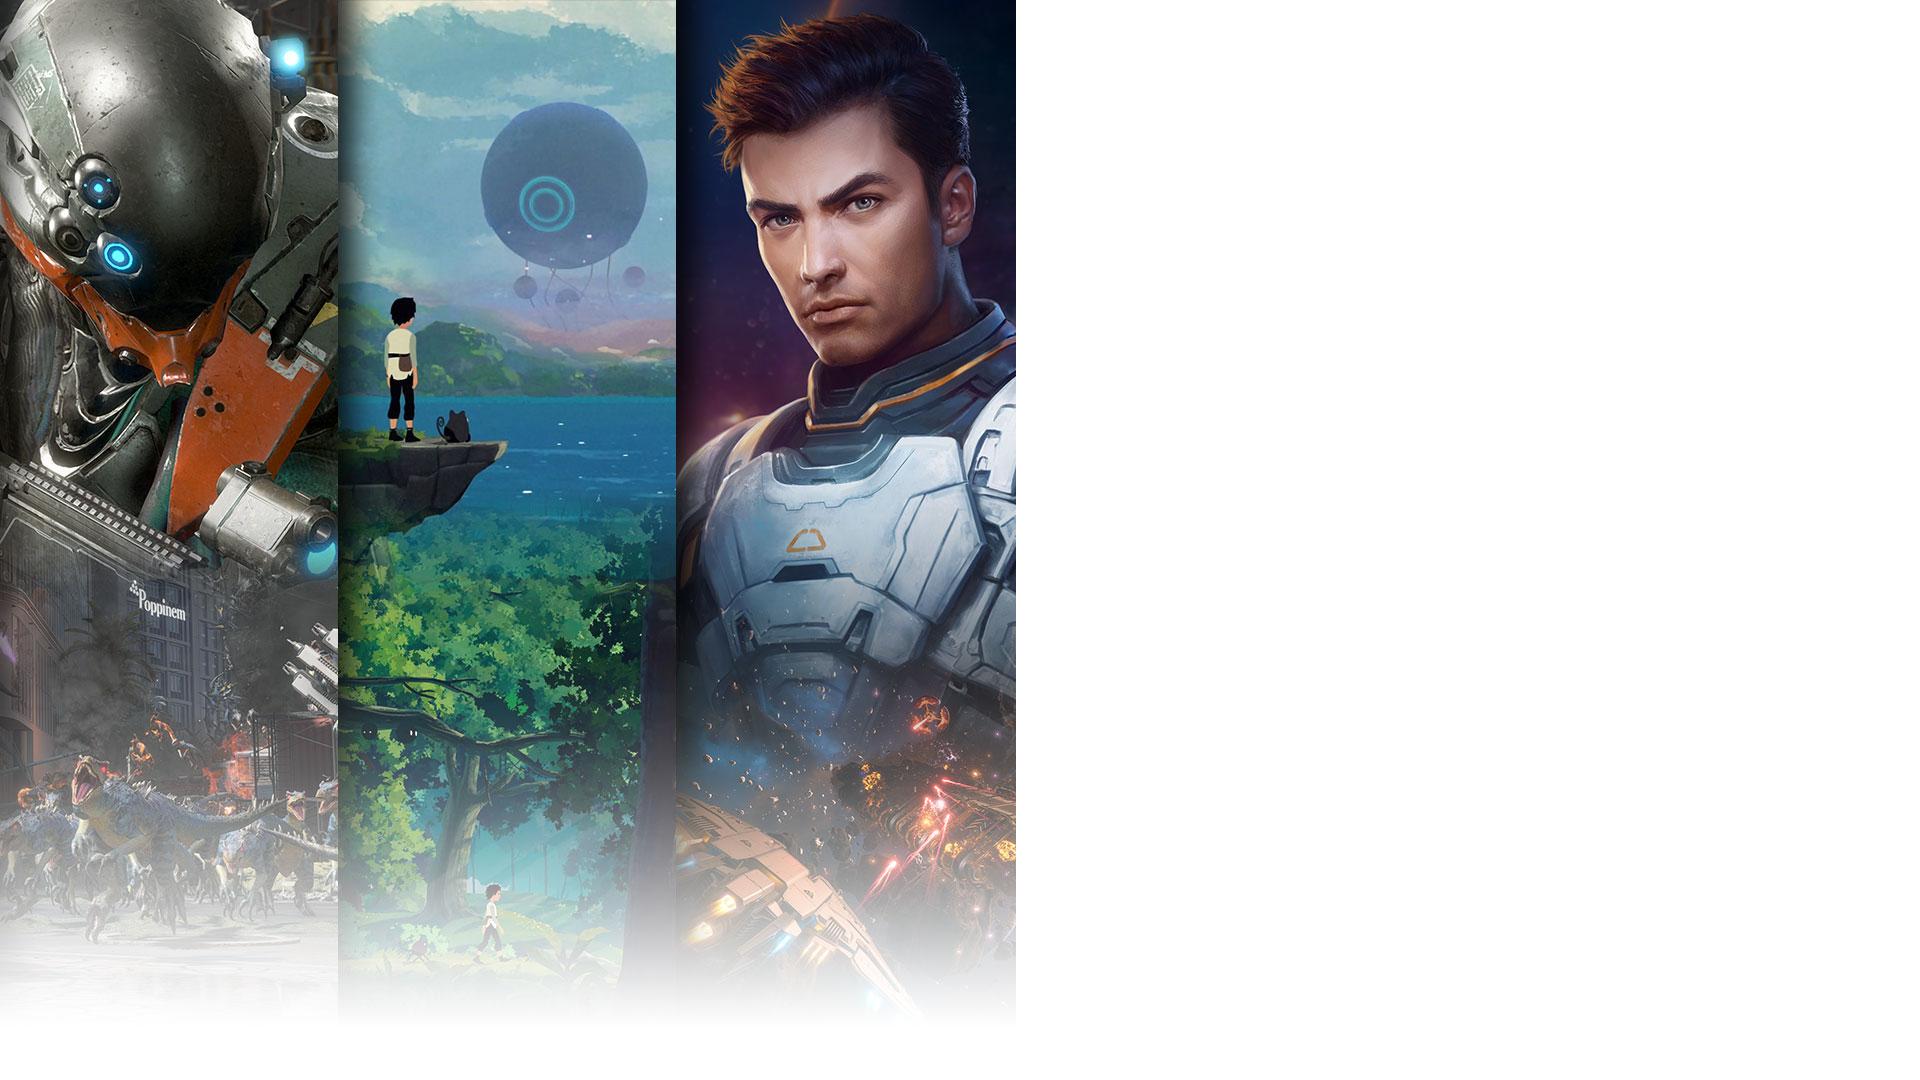 Game art from three titles arriving day one on game pass including Exoprimal, Planet of Lana, and Everspace 2.